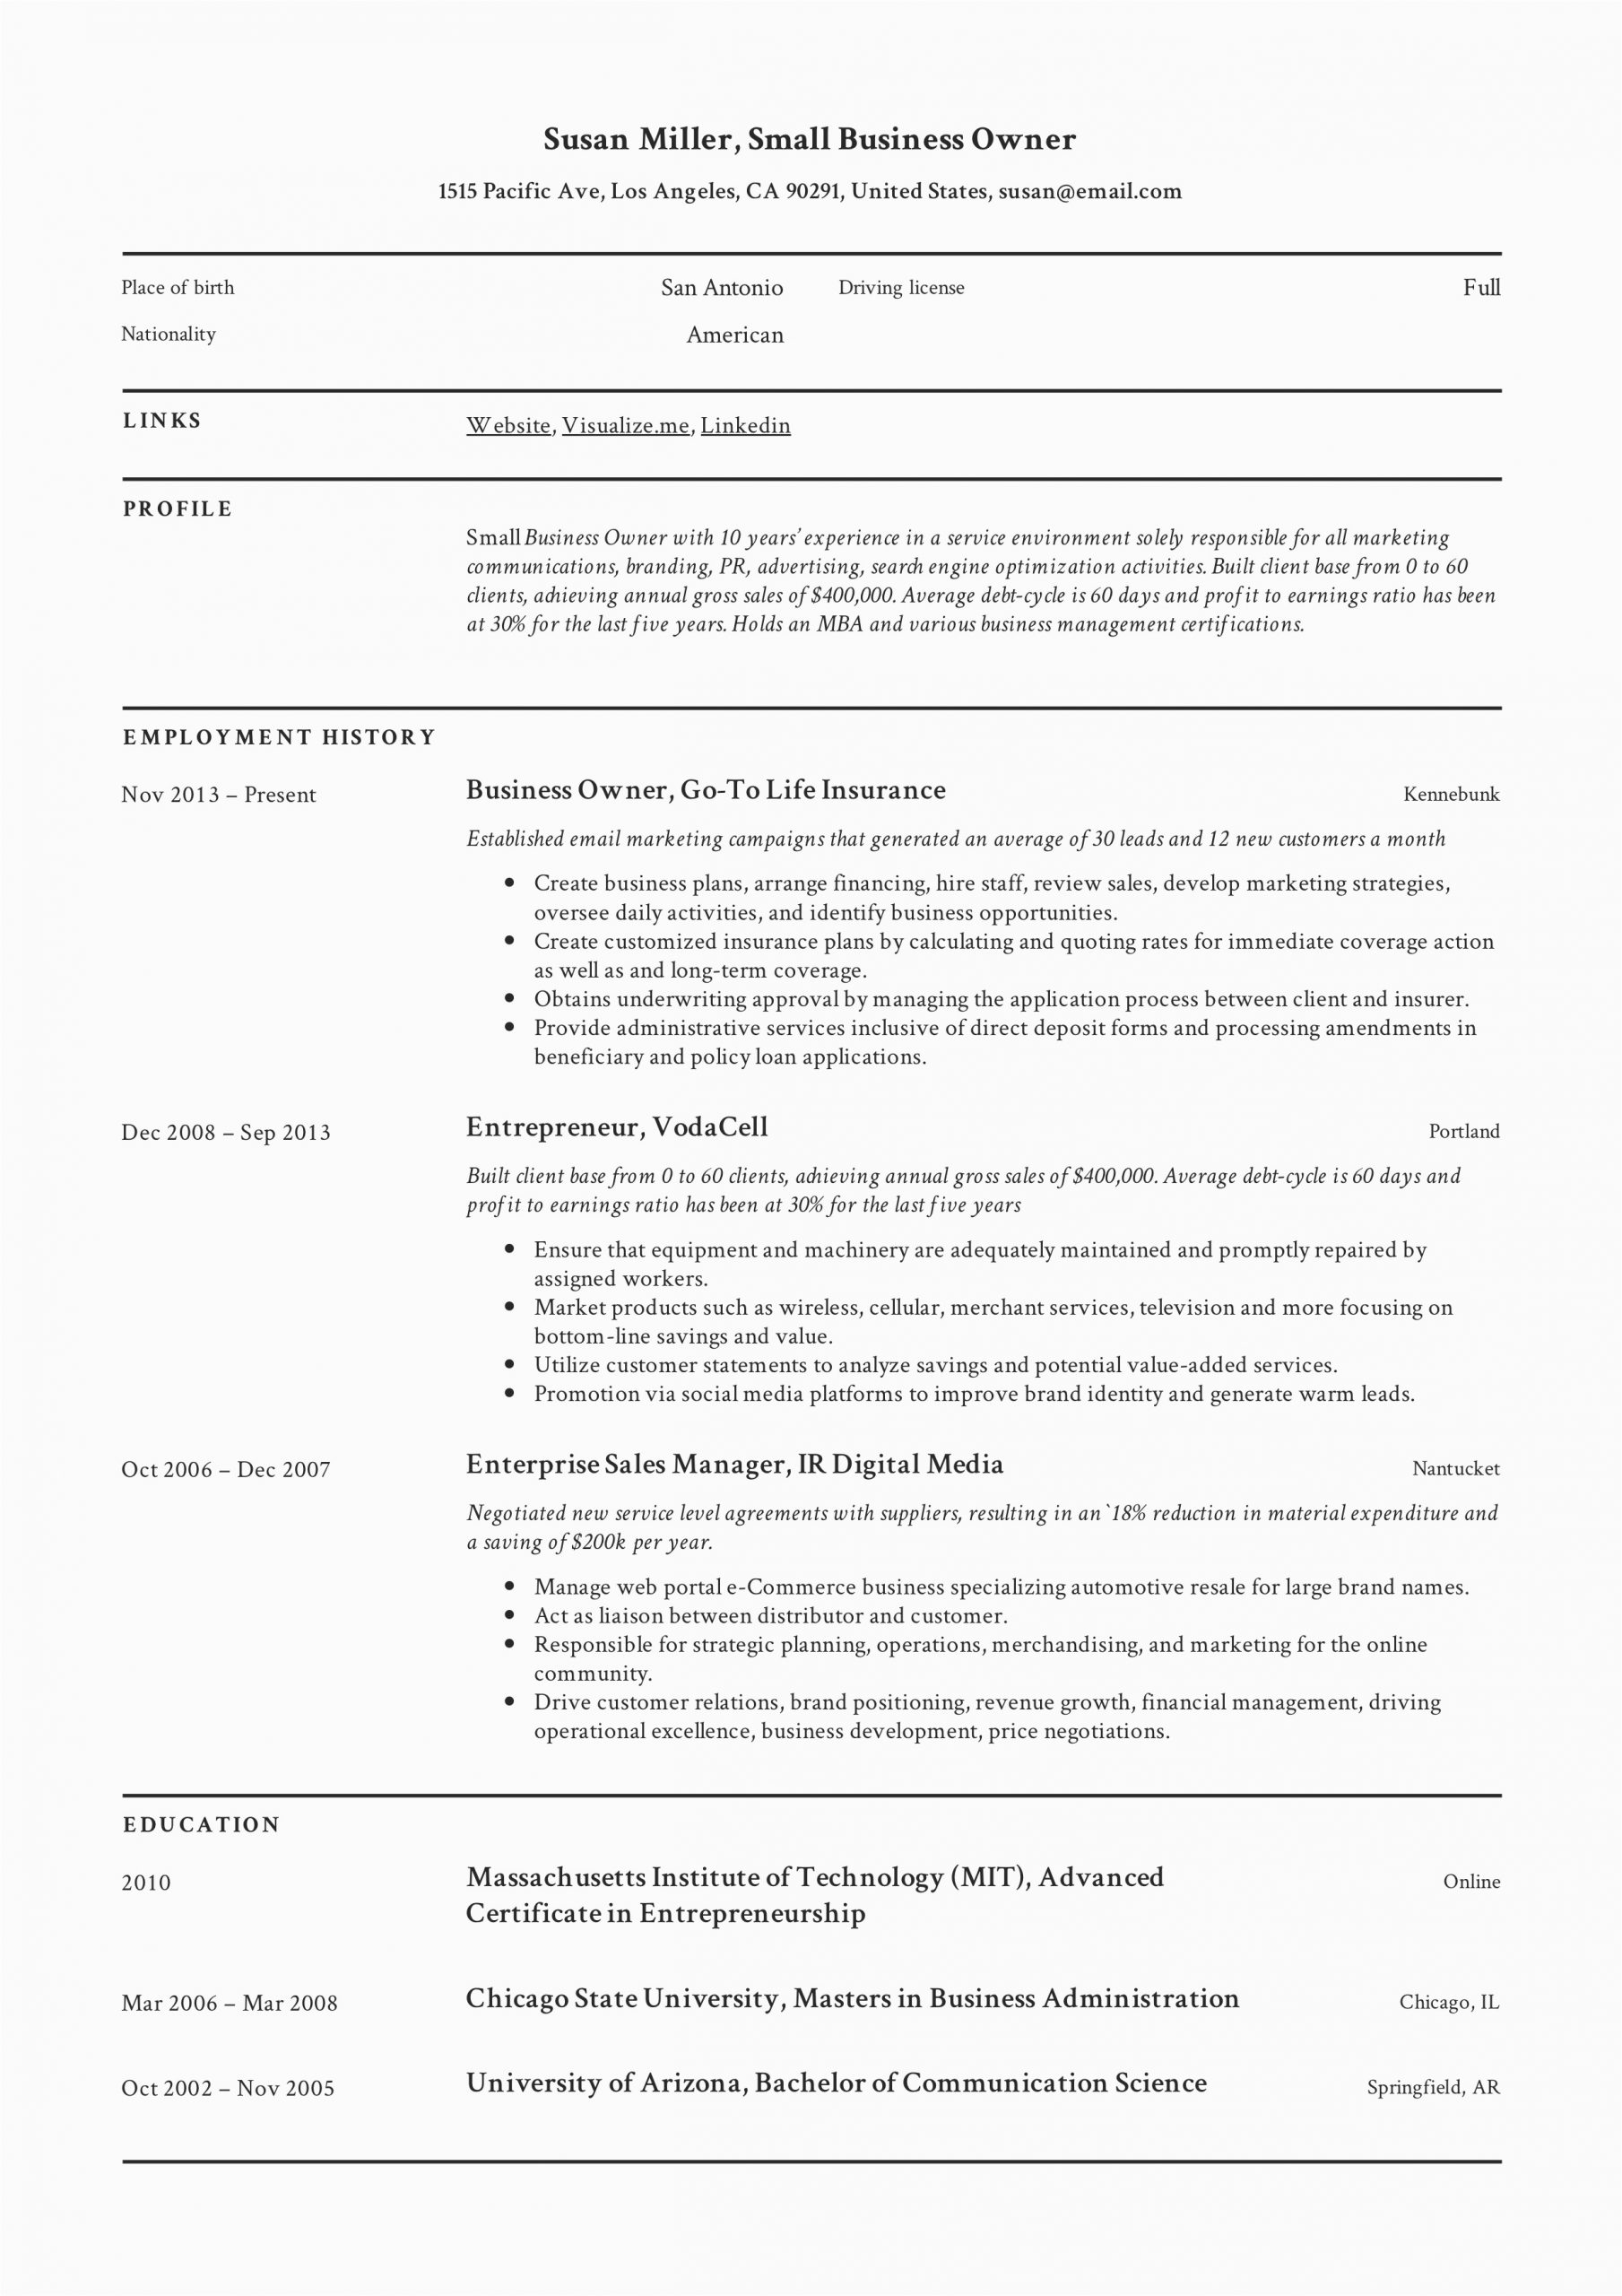 Resume Template for Small Business Owner Small Business Owner Resume Guide 12 Examples Pdf